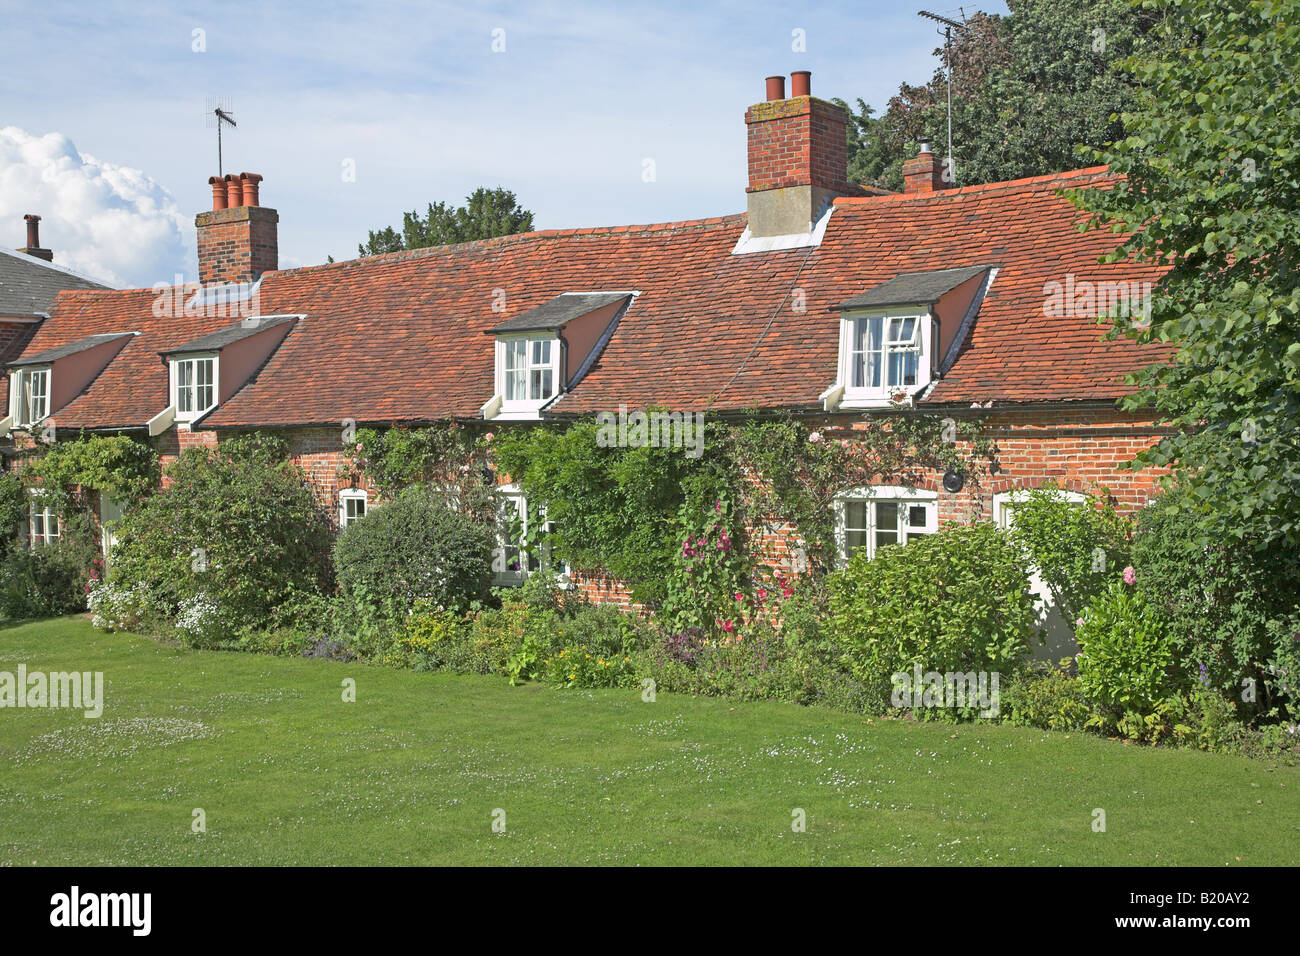 Row of terraced country cottages Orford, Suffolk, England Stock Photo